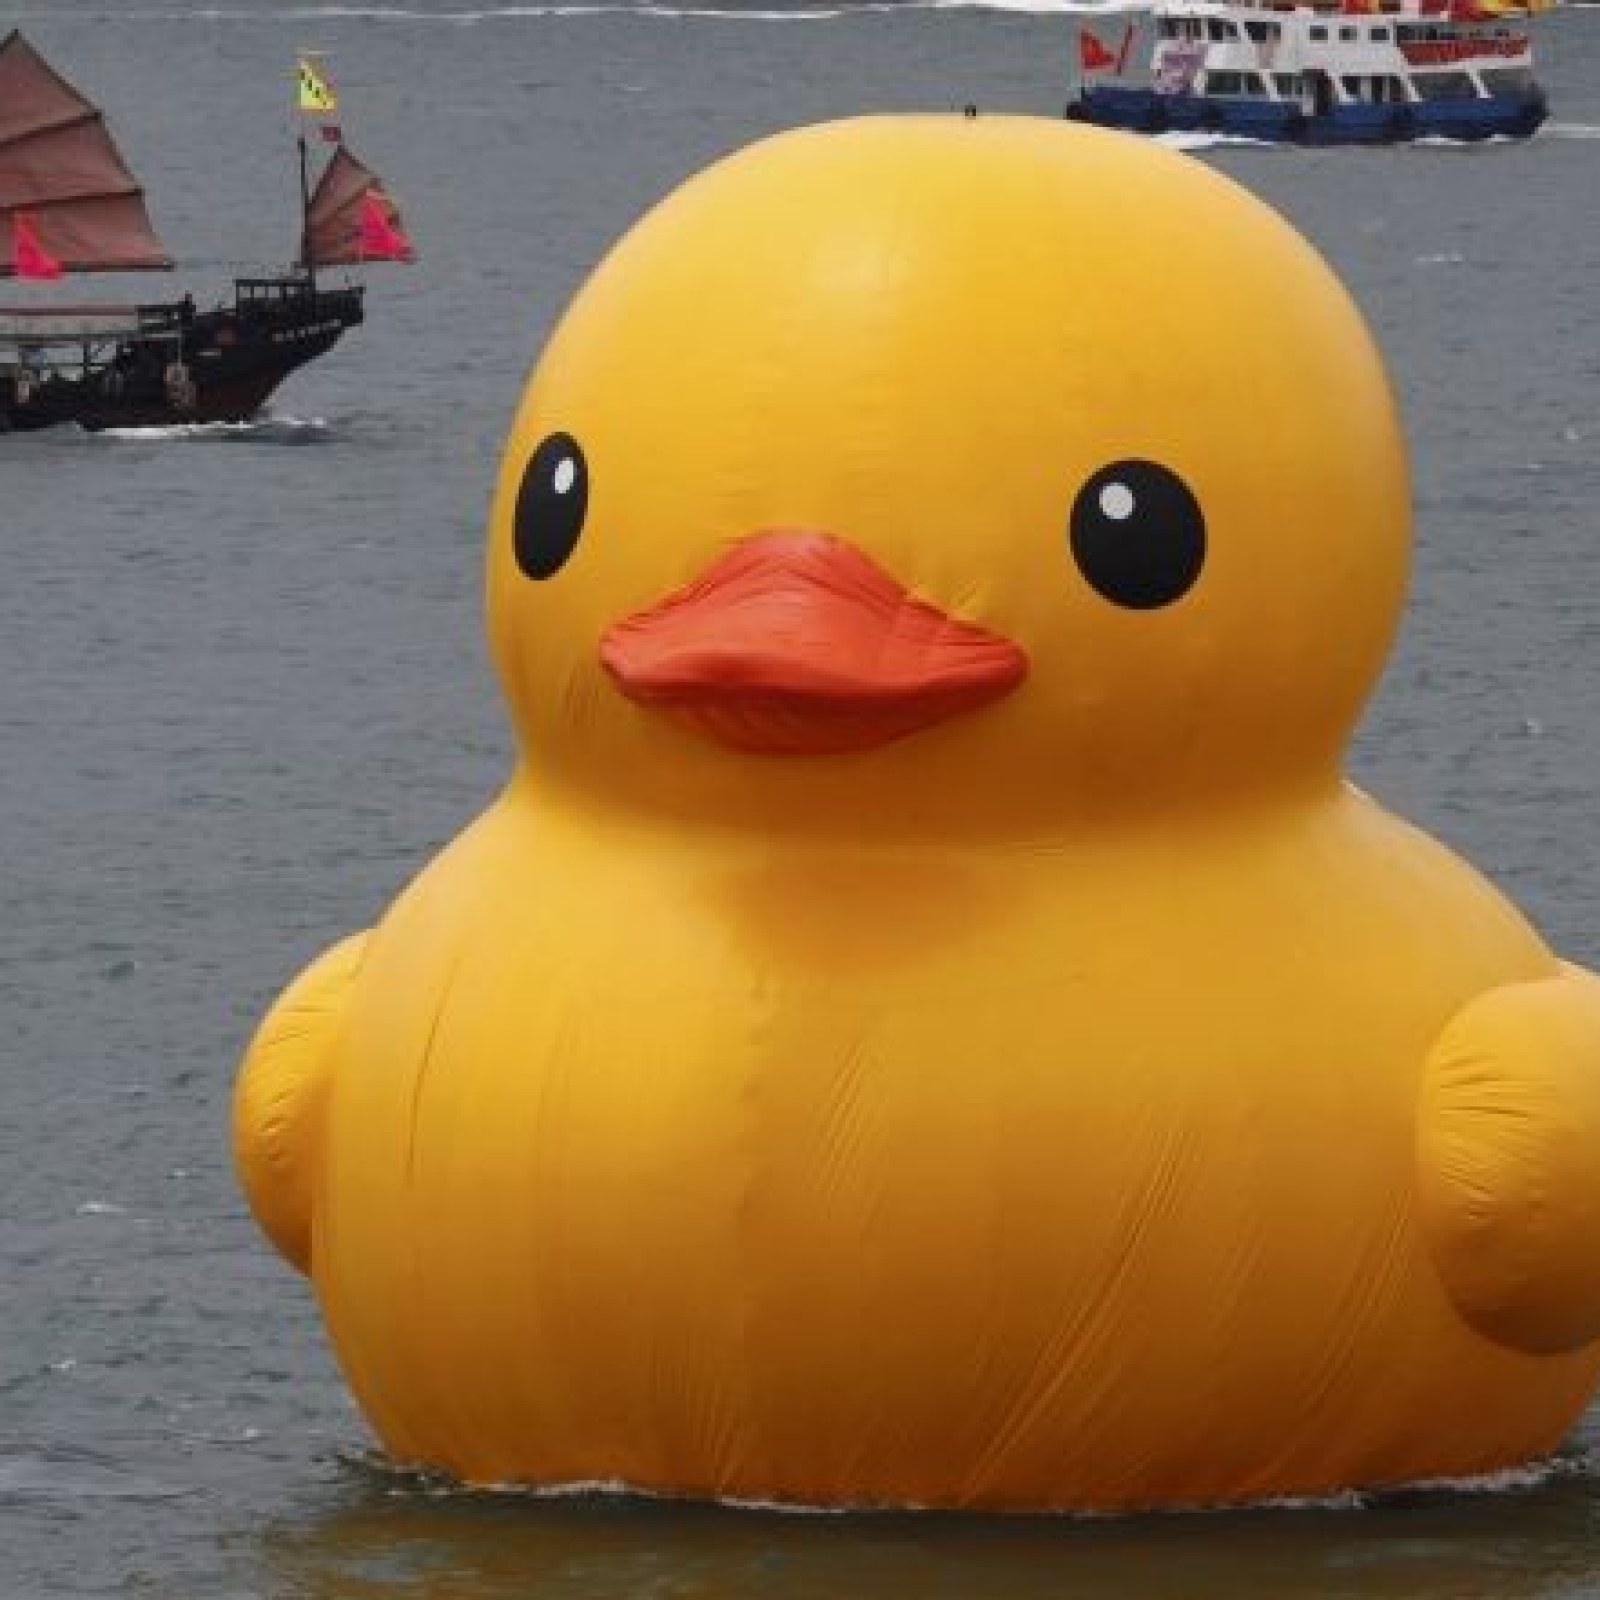 National Rubber Ducky Day 2021: 12 Facts You May Not Know About